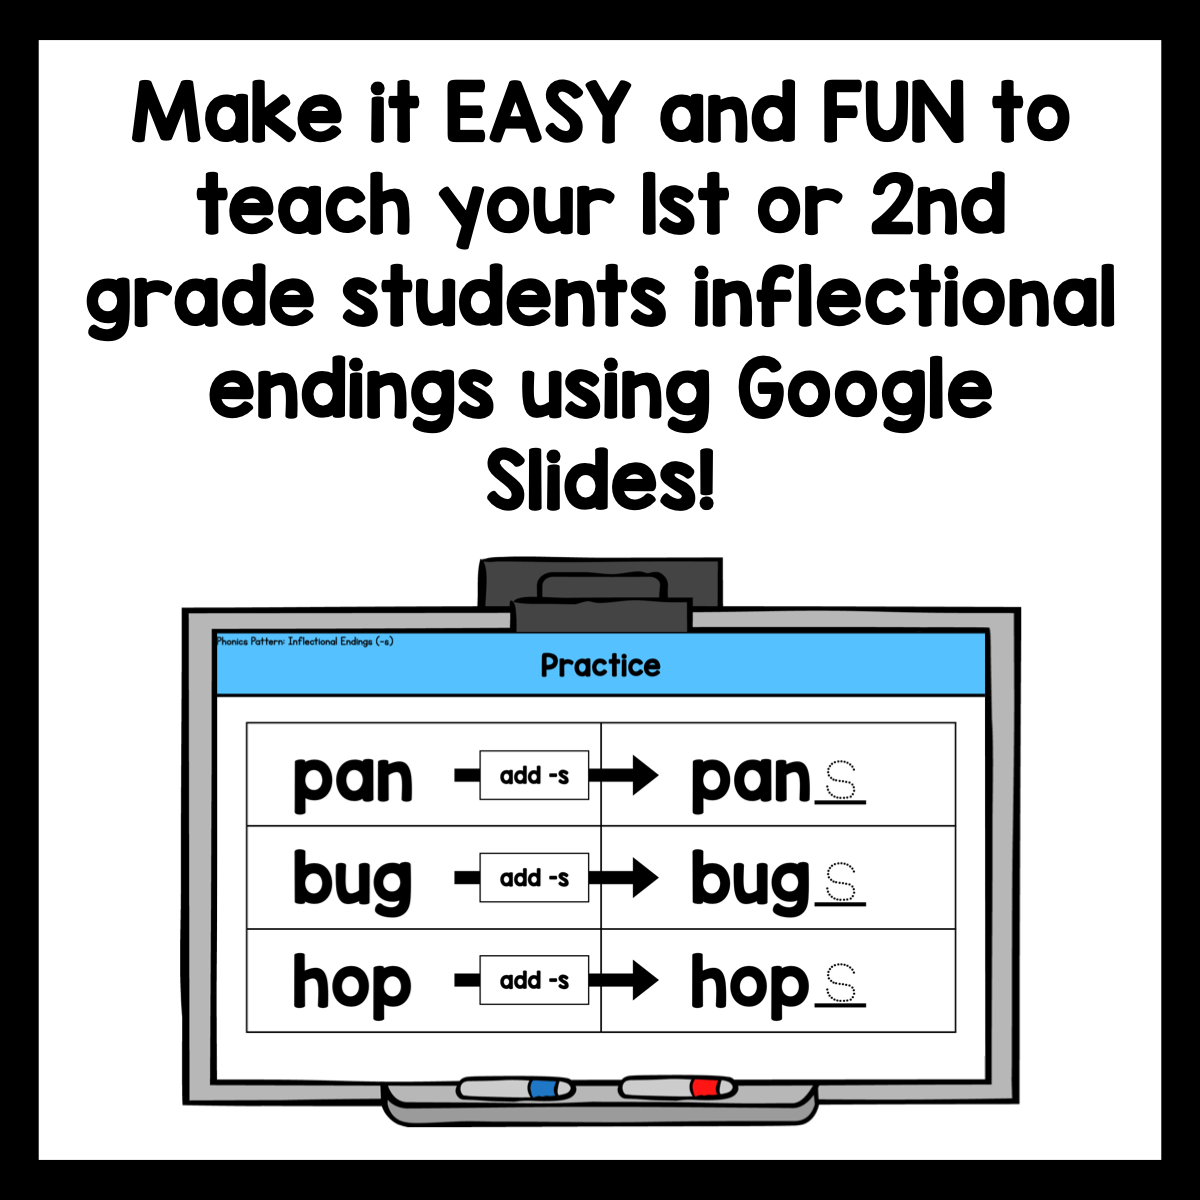 Inflectional Endings Phonics Slides | Google Slides Phonics Digital Resources - Learning at the Primary Pond